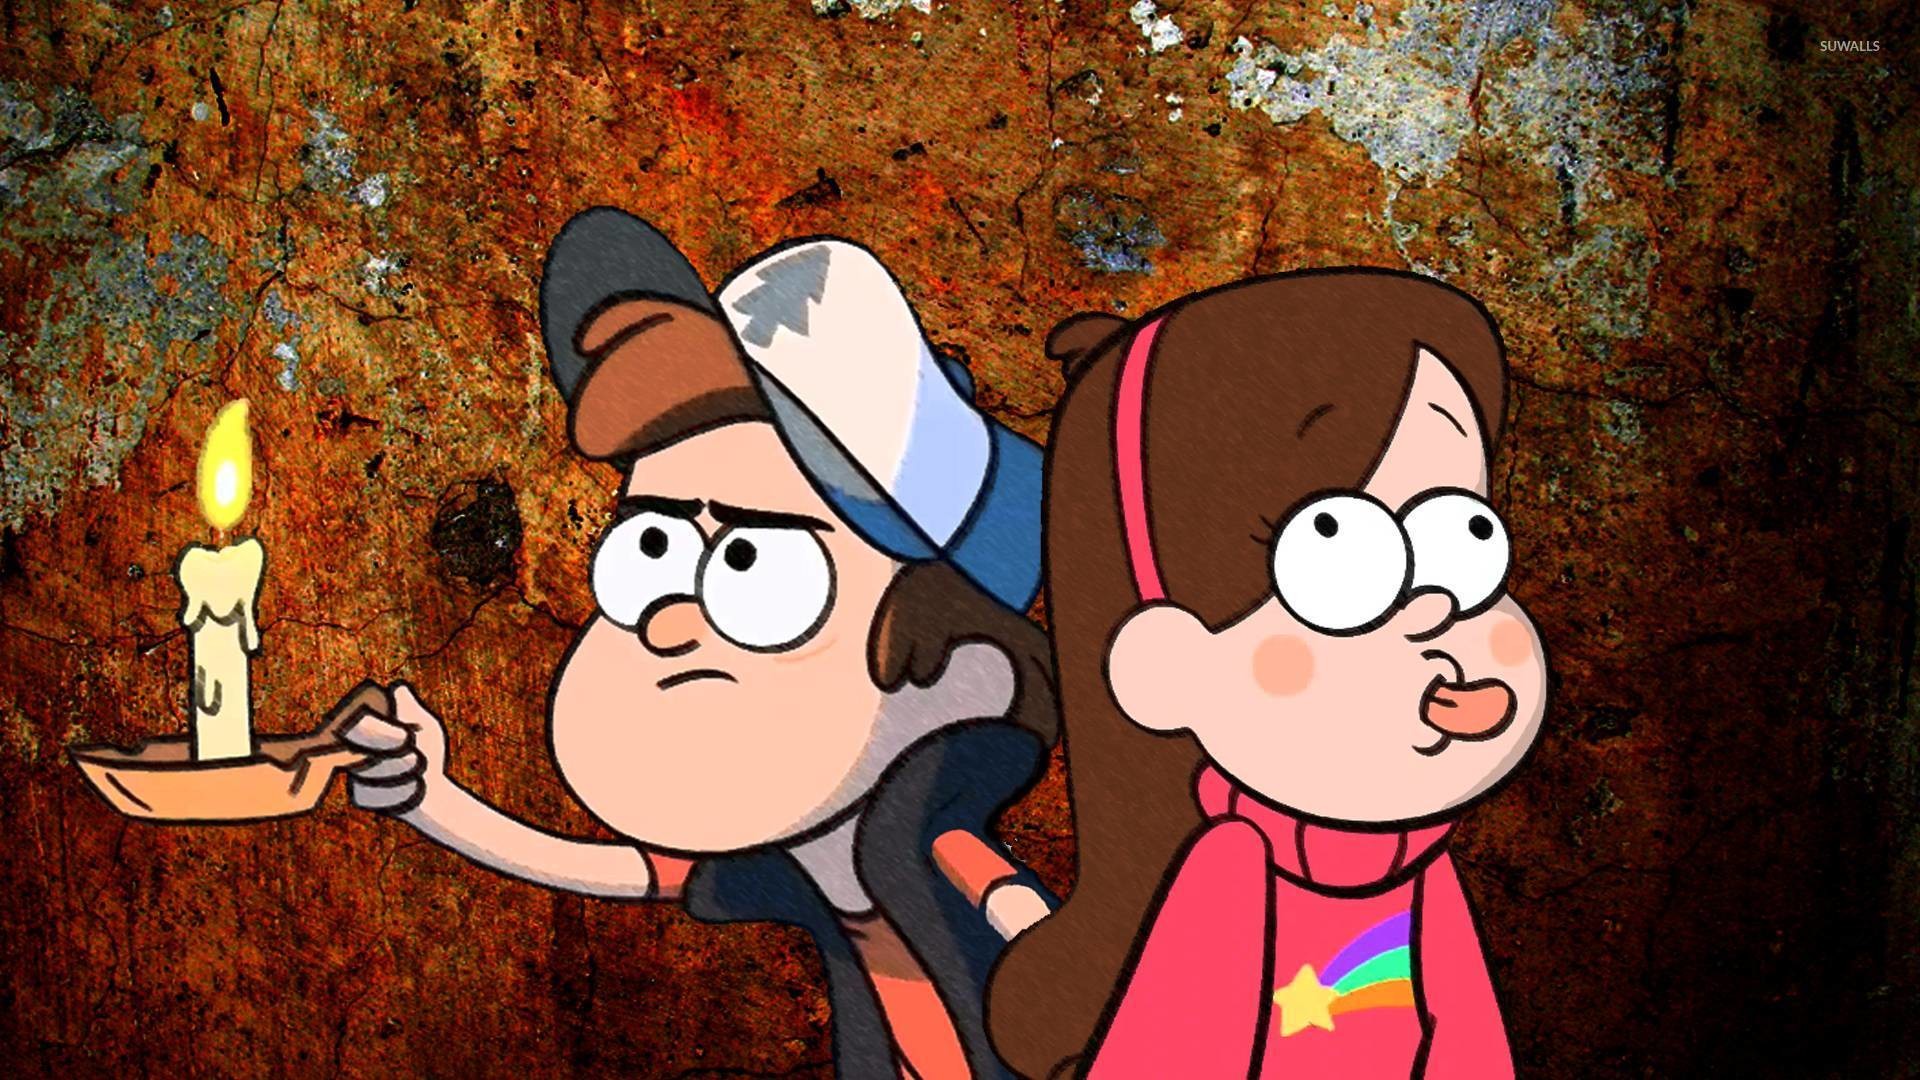 Dipper and Mabel from Gravity Falls by atticuslover12 on DeviantArt